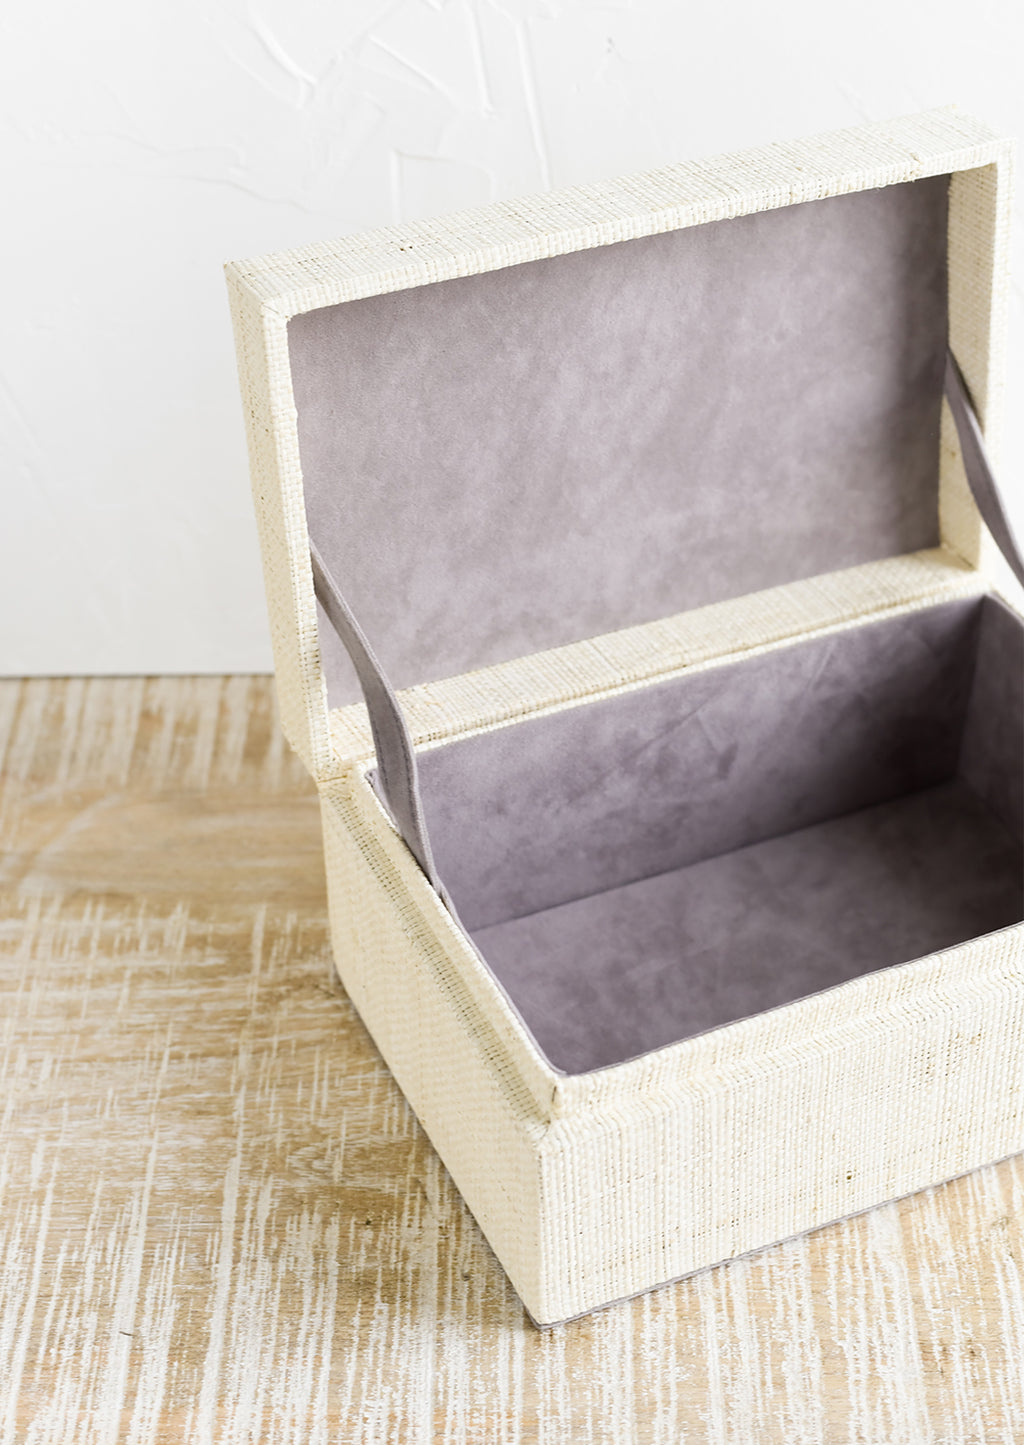 3: Microfiber lined storage box with hinges.